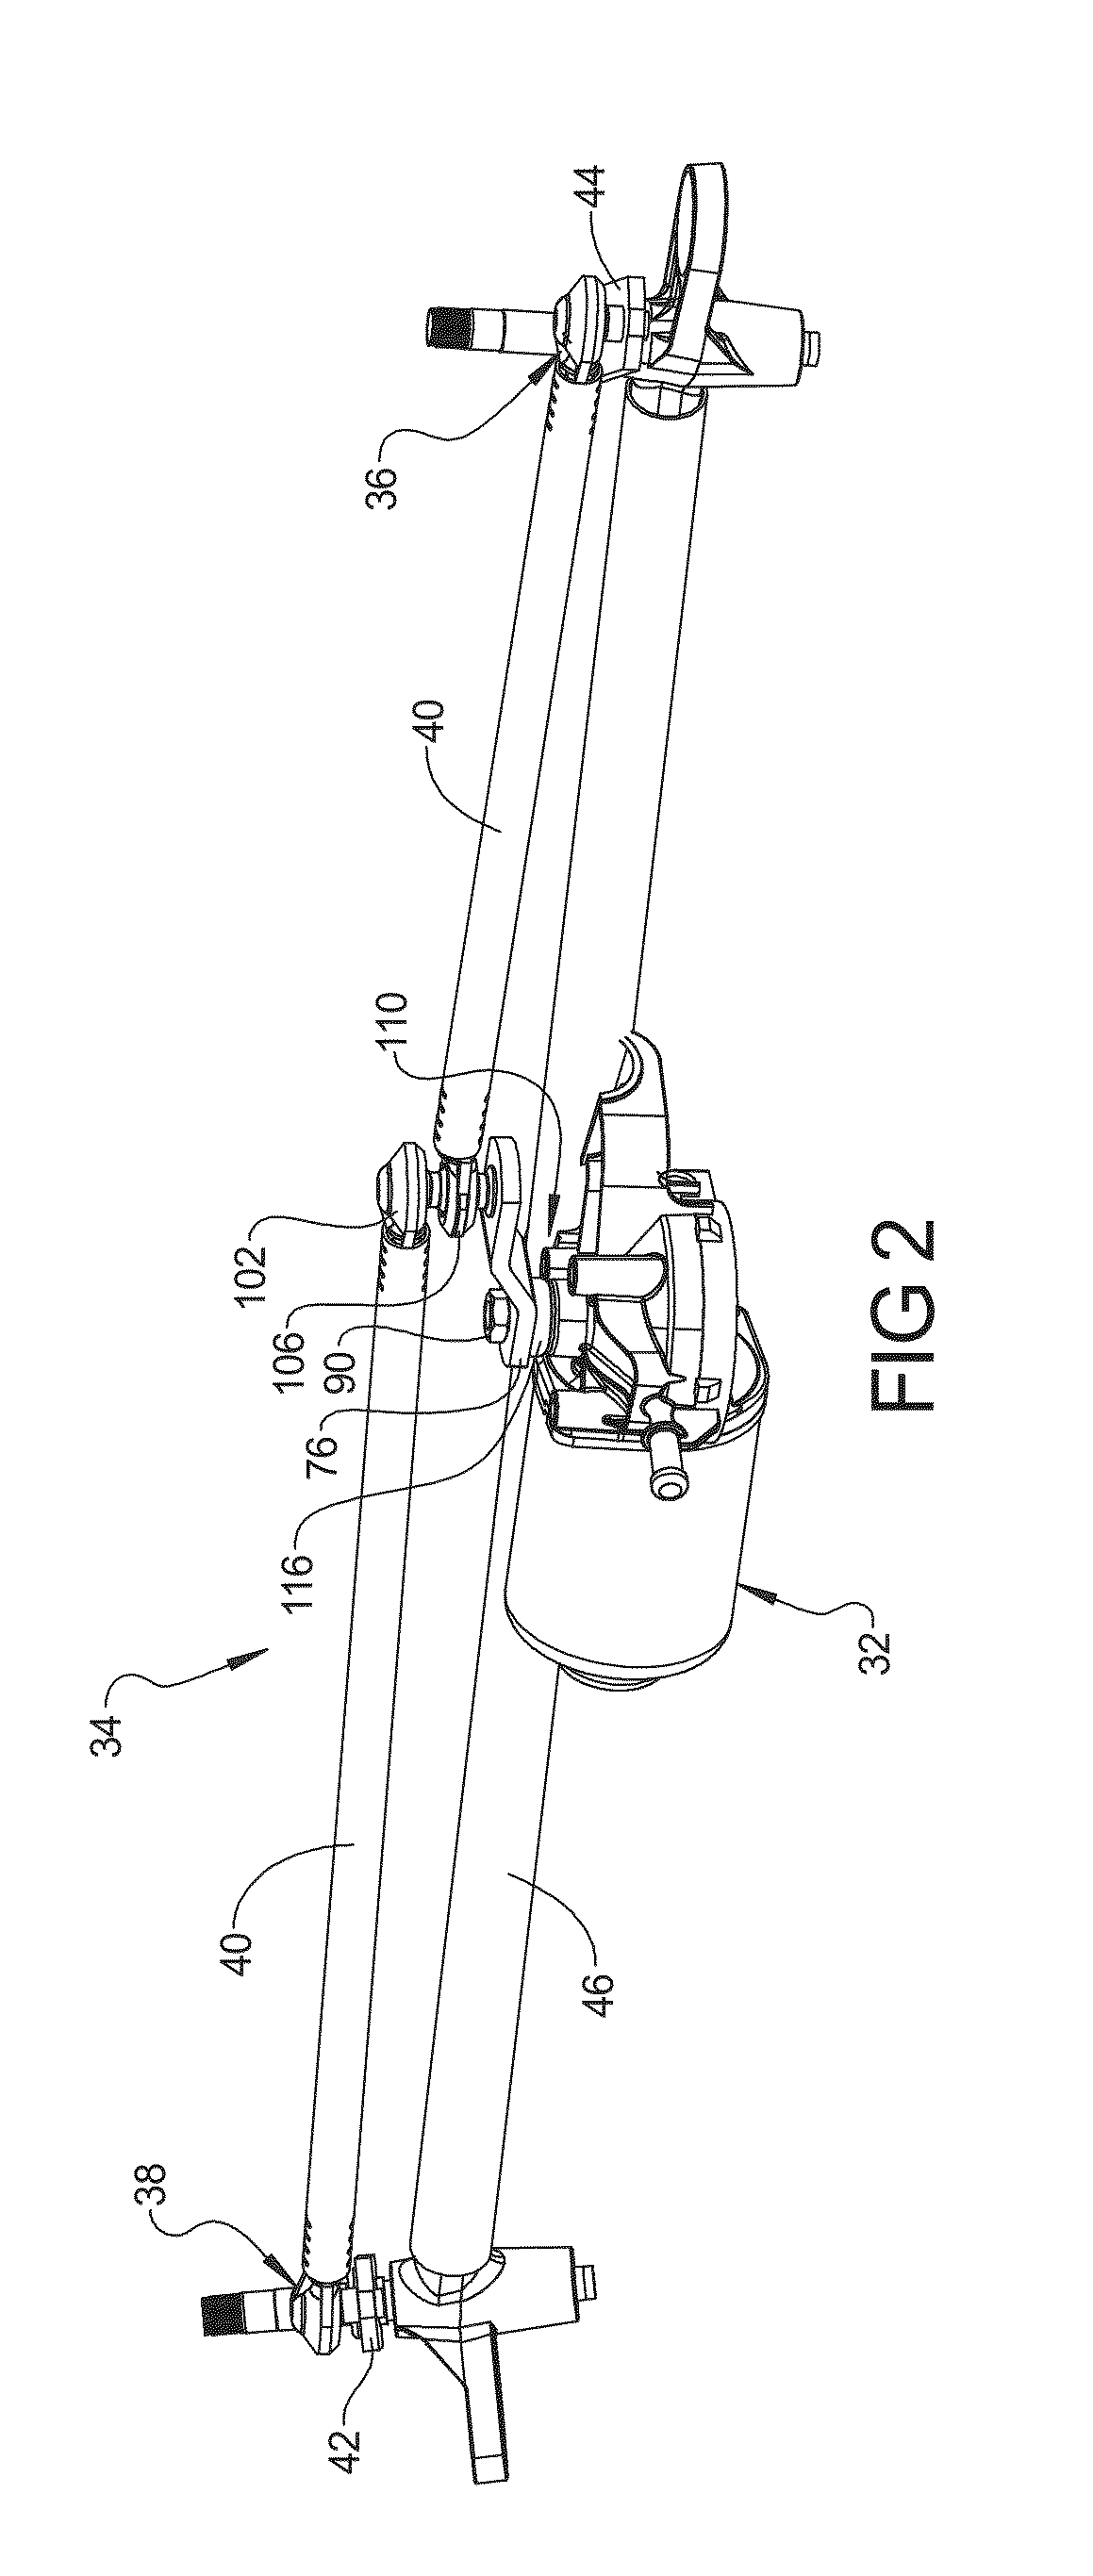 Wiper System Having Resilient Interface Assembly For Worm-Driven Reduction Gear Motor